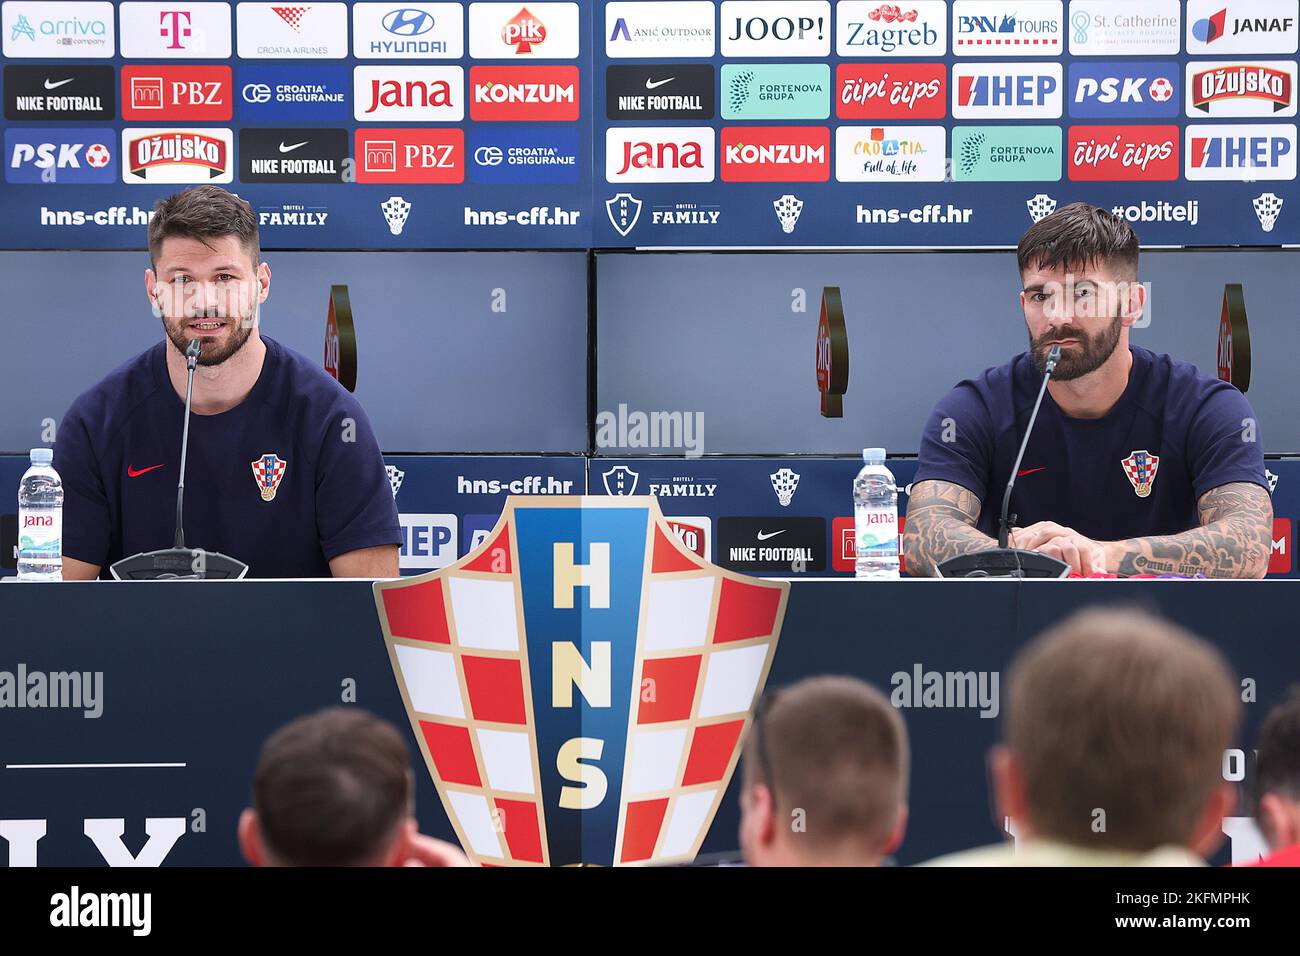 Croatian national team players Marko Livaja and Bruno Petkovic speak during a press conference ahead of the start of the FIFA World Cup in Doha, Qatar on November 19, 2022